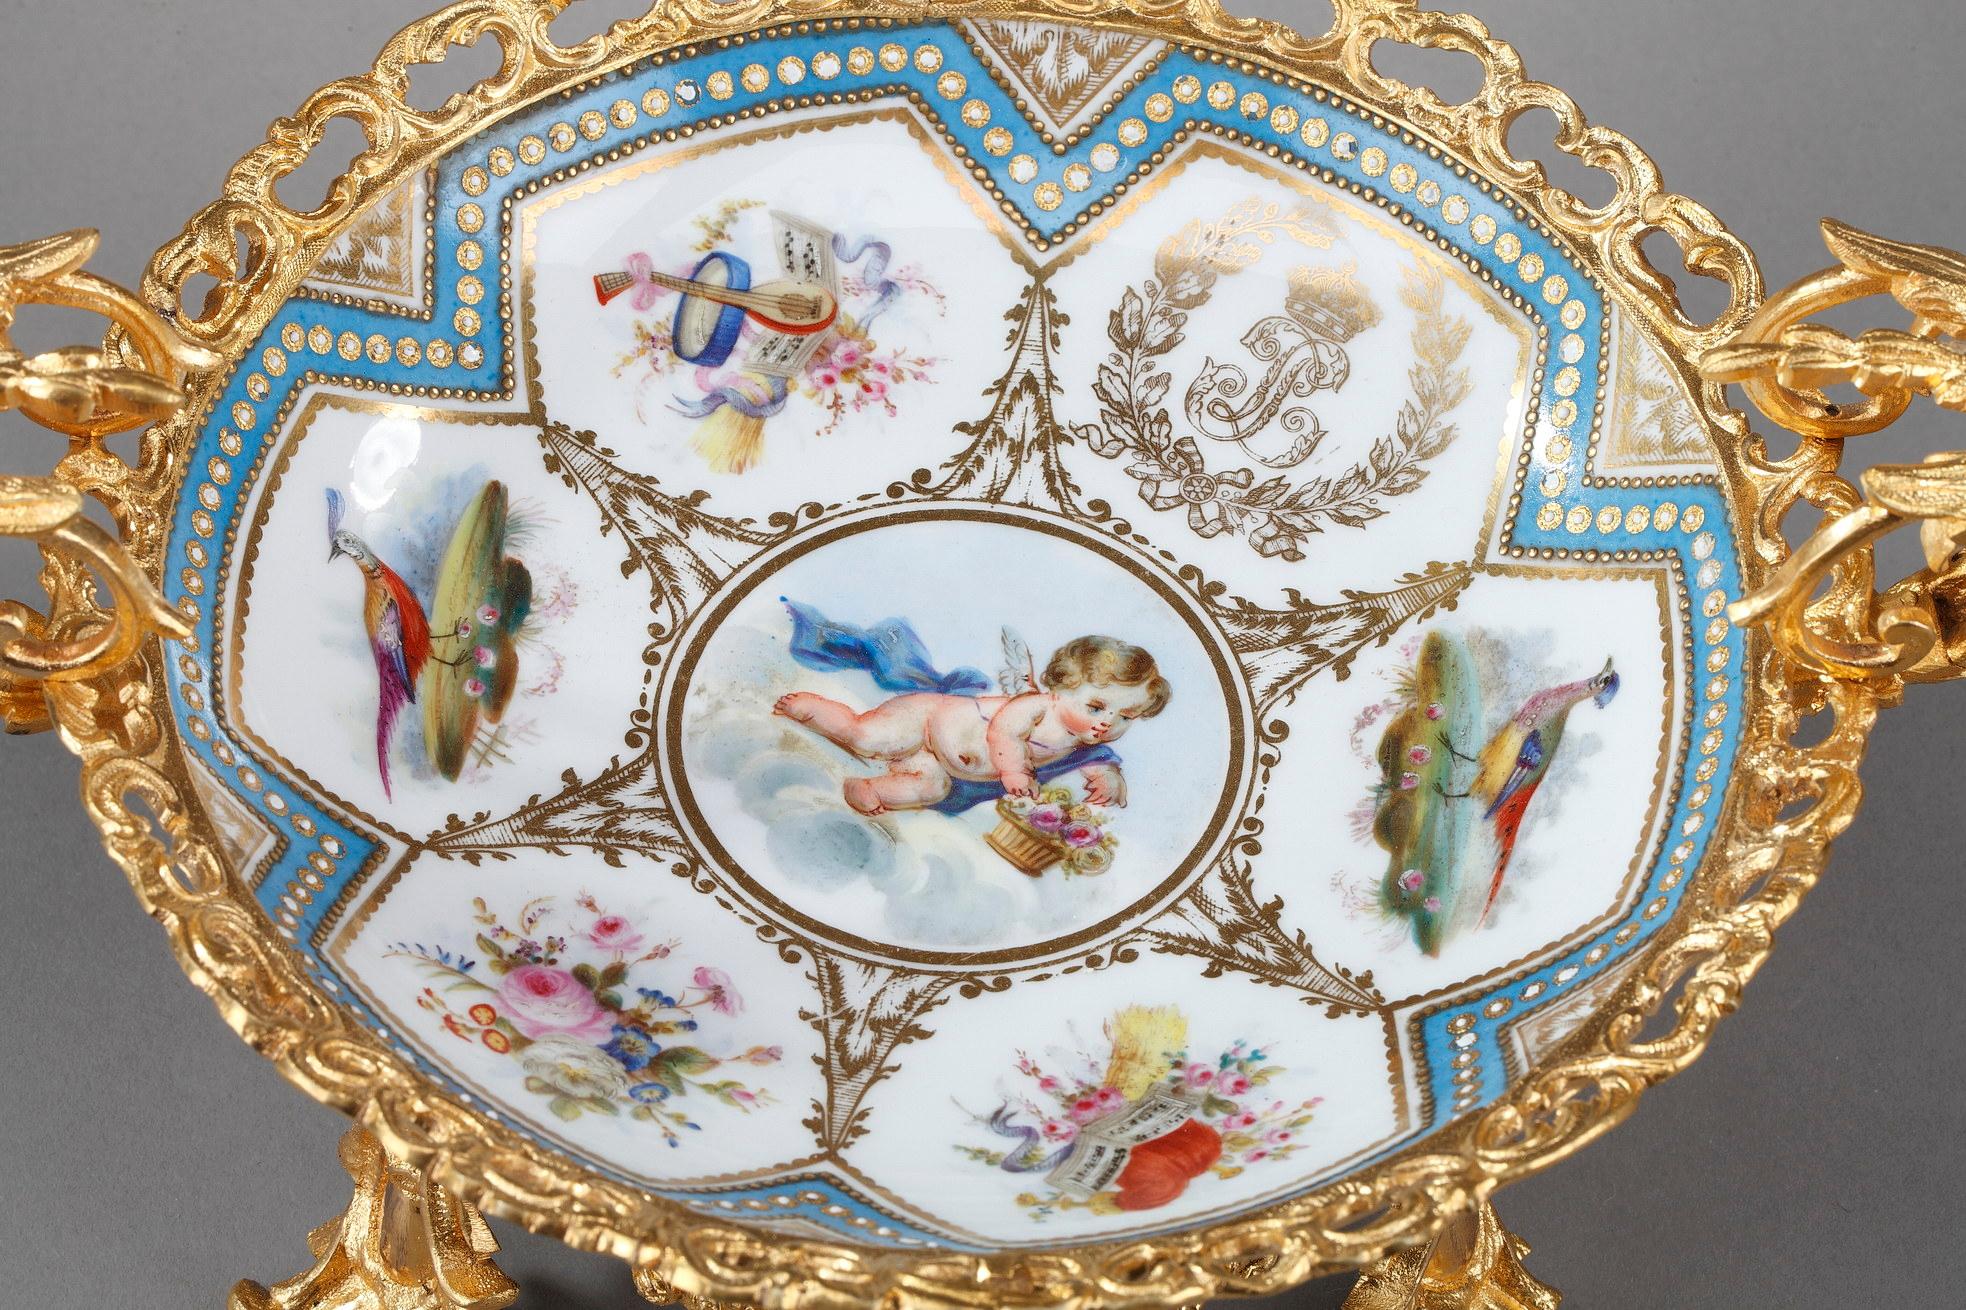 Mid-19th Century Bowl in Sèvres Porcelain Decorated with a Cupid from the Louis-Philippe Period